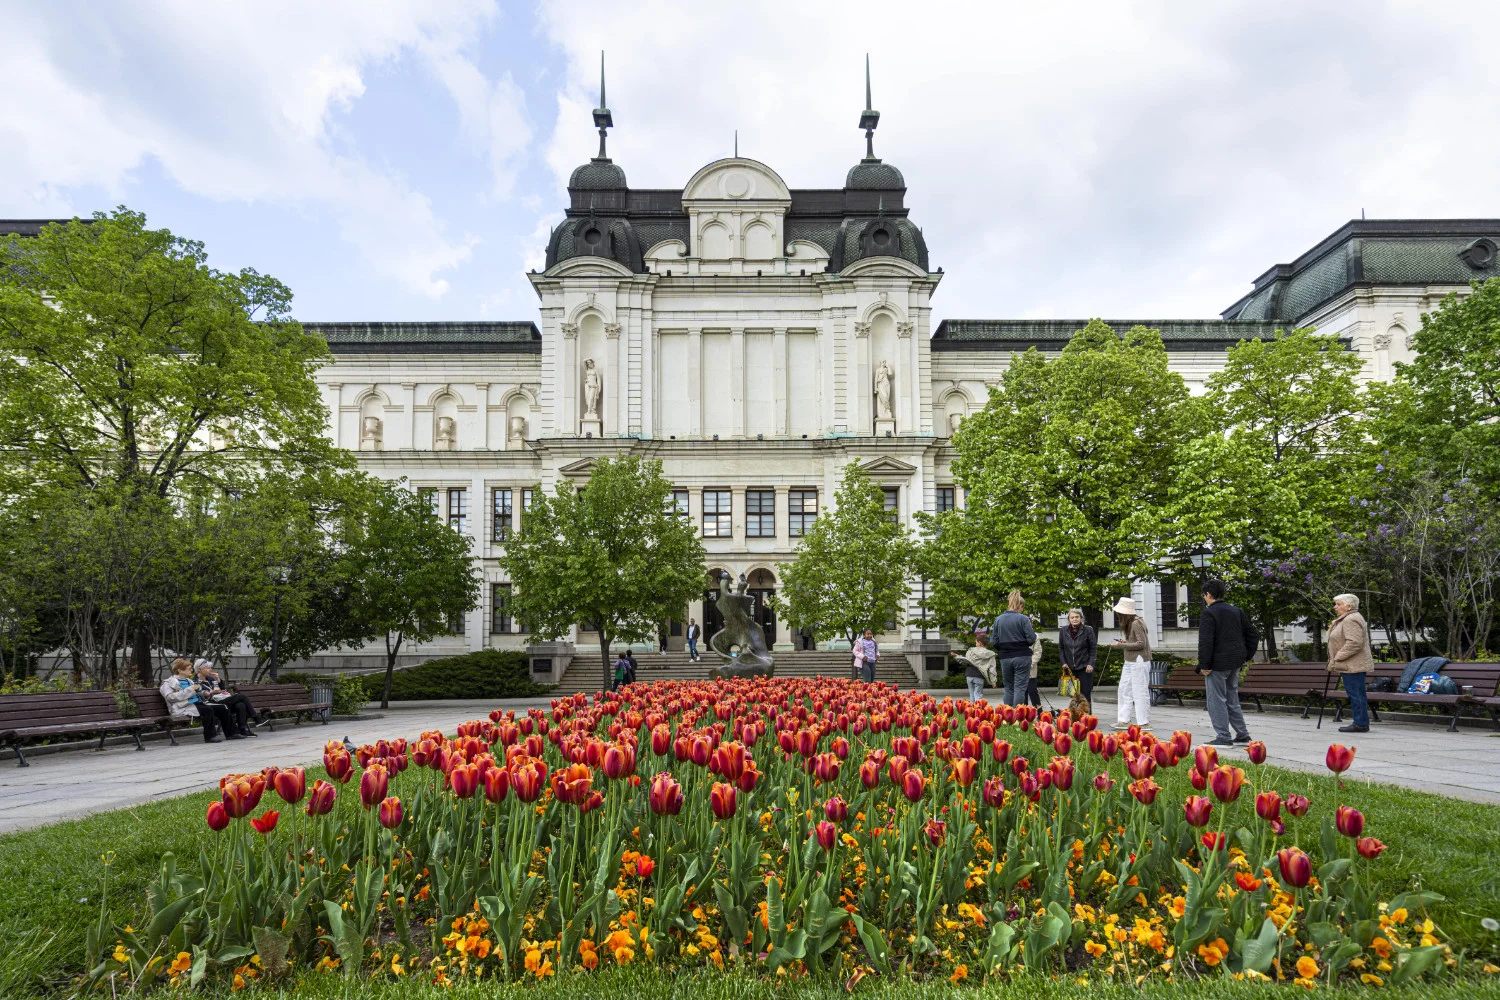 National Gallery - Artworks from across Bulgaria and Europe are on display at this renowned venue.